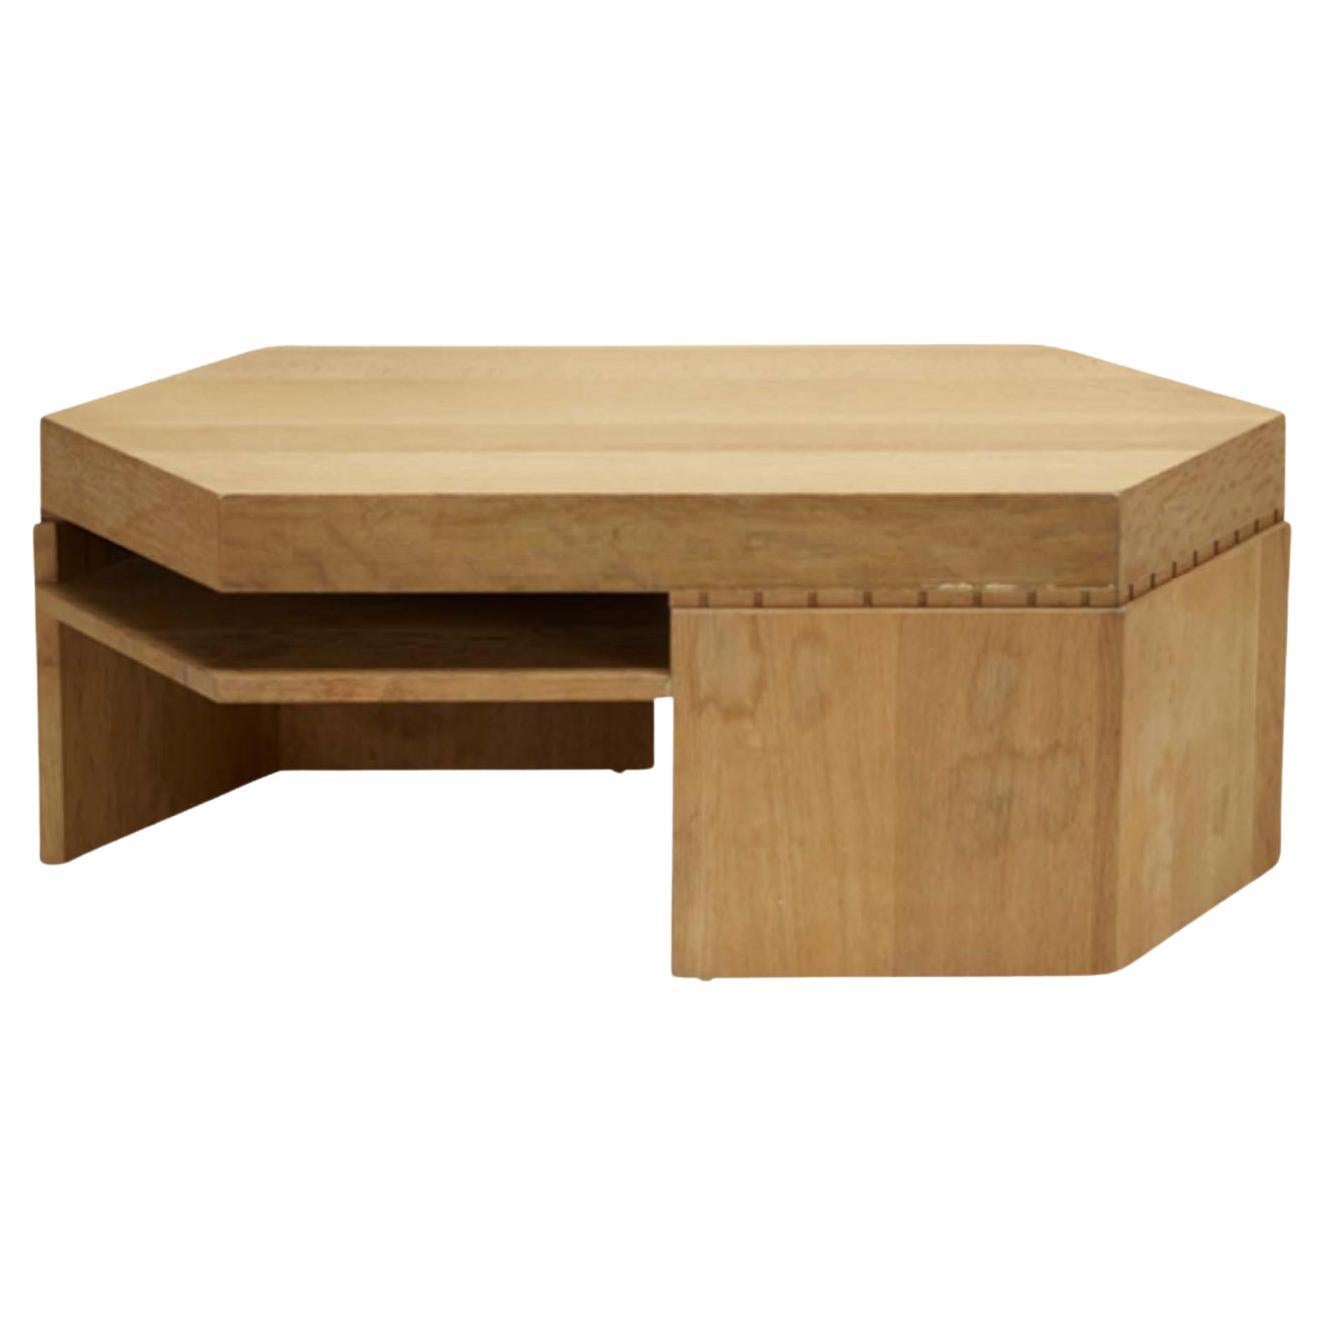 Frank Lloyd Wright Coffee Table 'after'